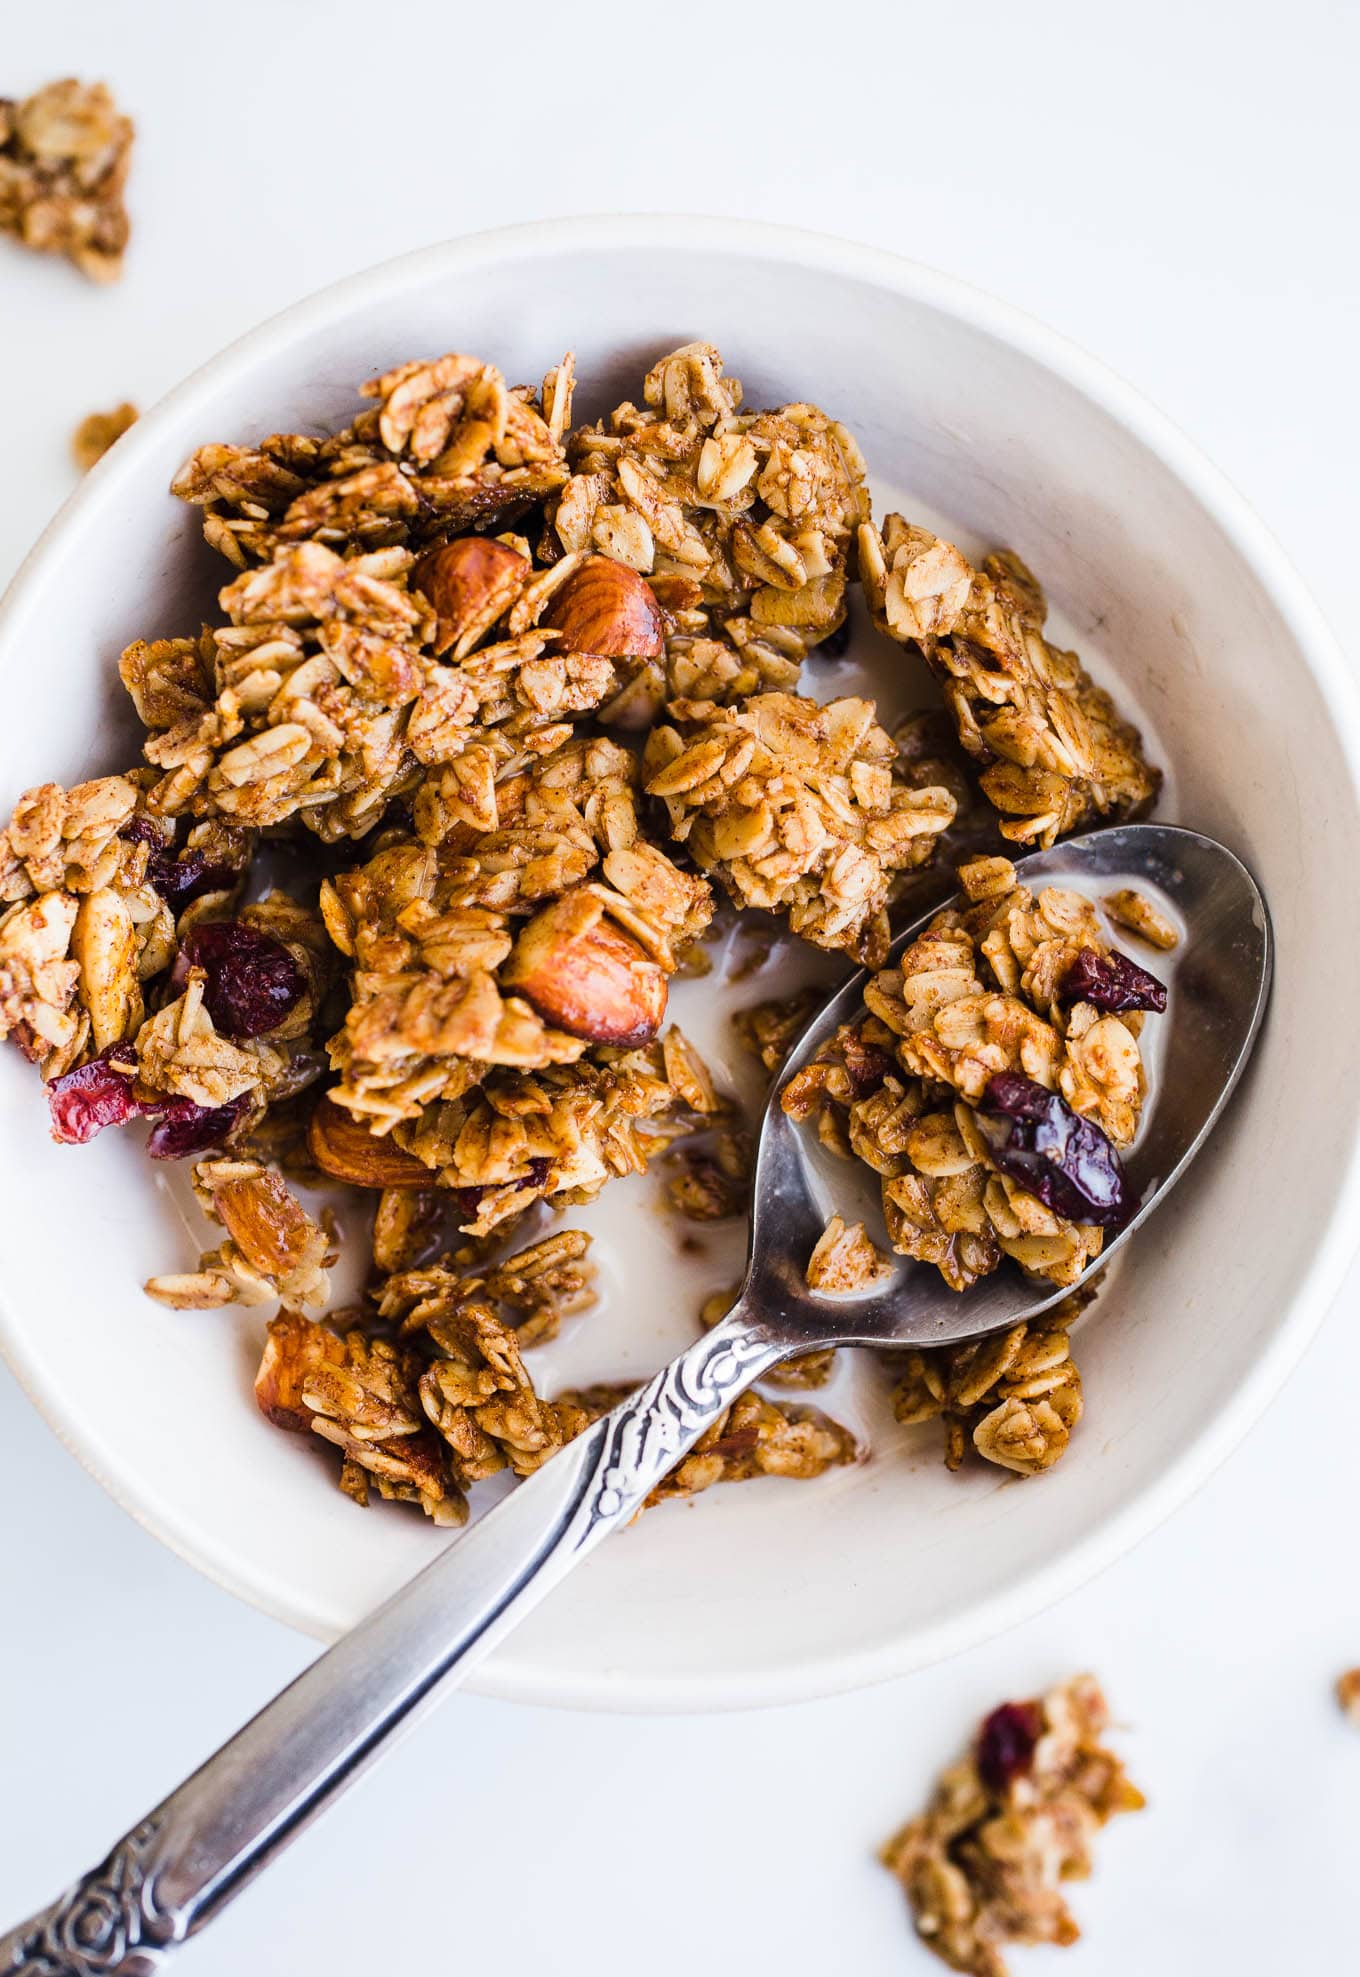 Gingerbread granola in a white bowl.